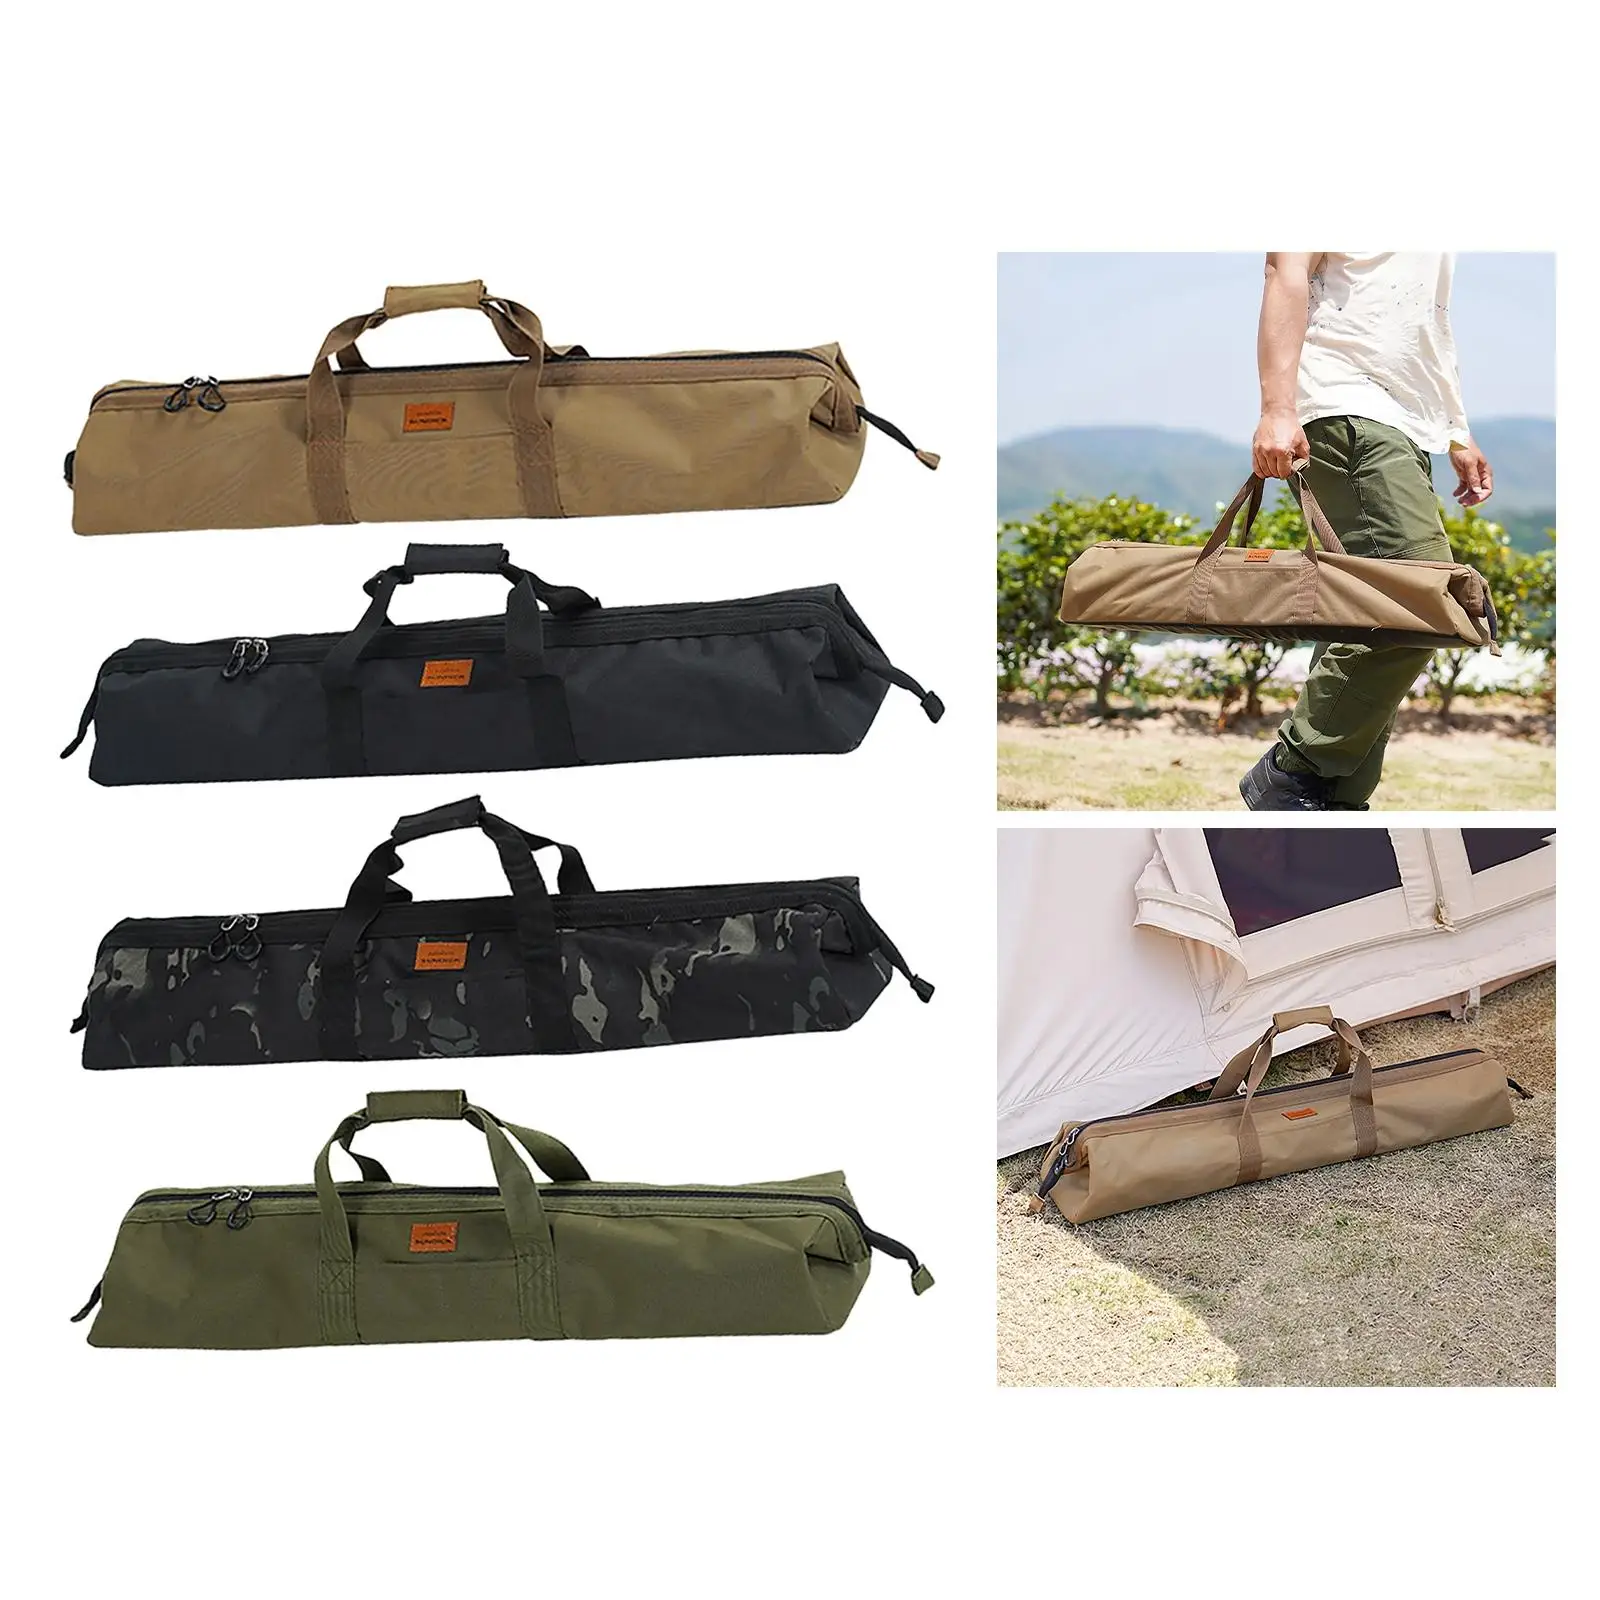 Canopy Pole Storage Resistant with Handle Zipper Closure Carrying Bag  Pole